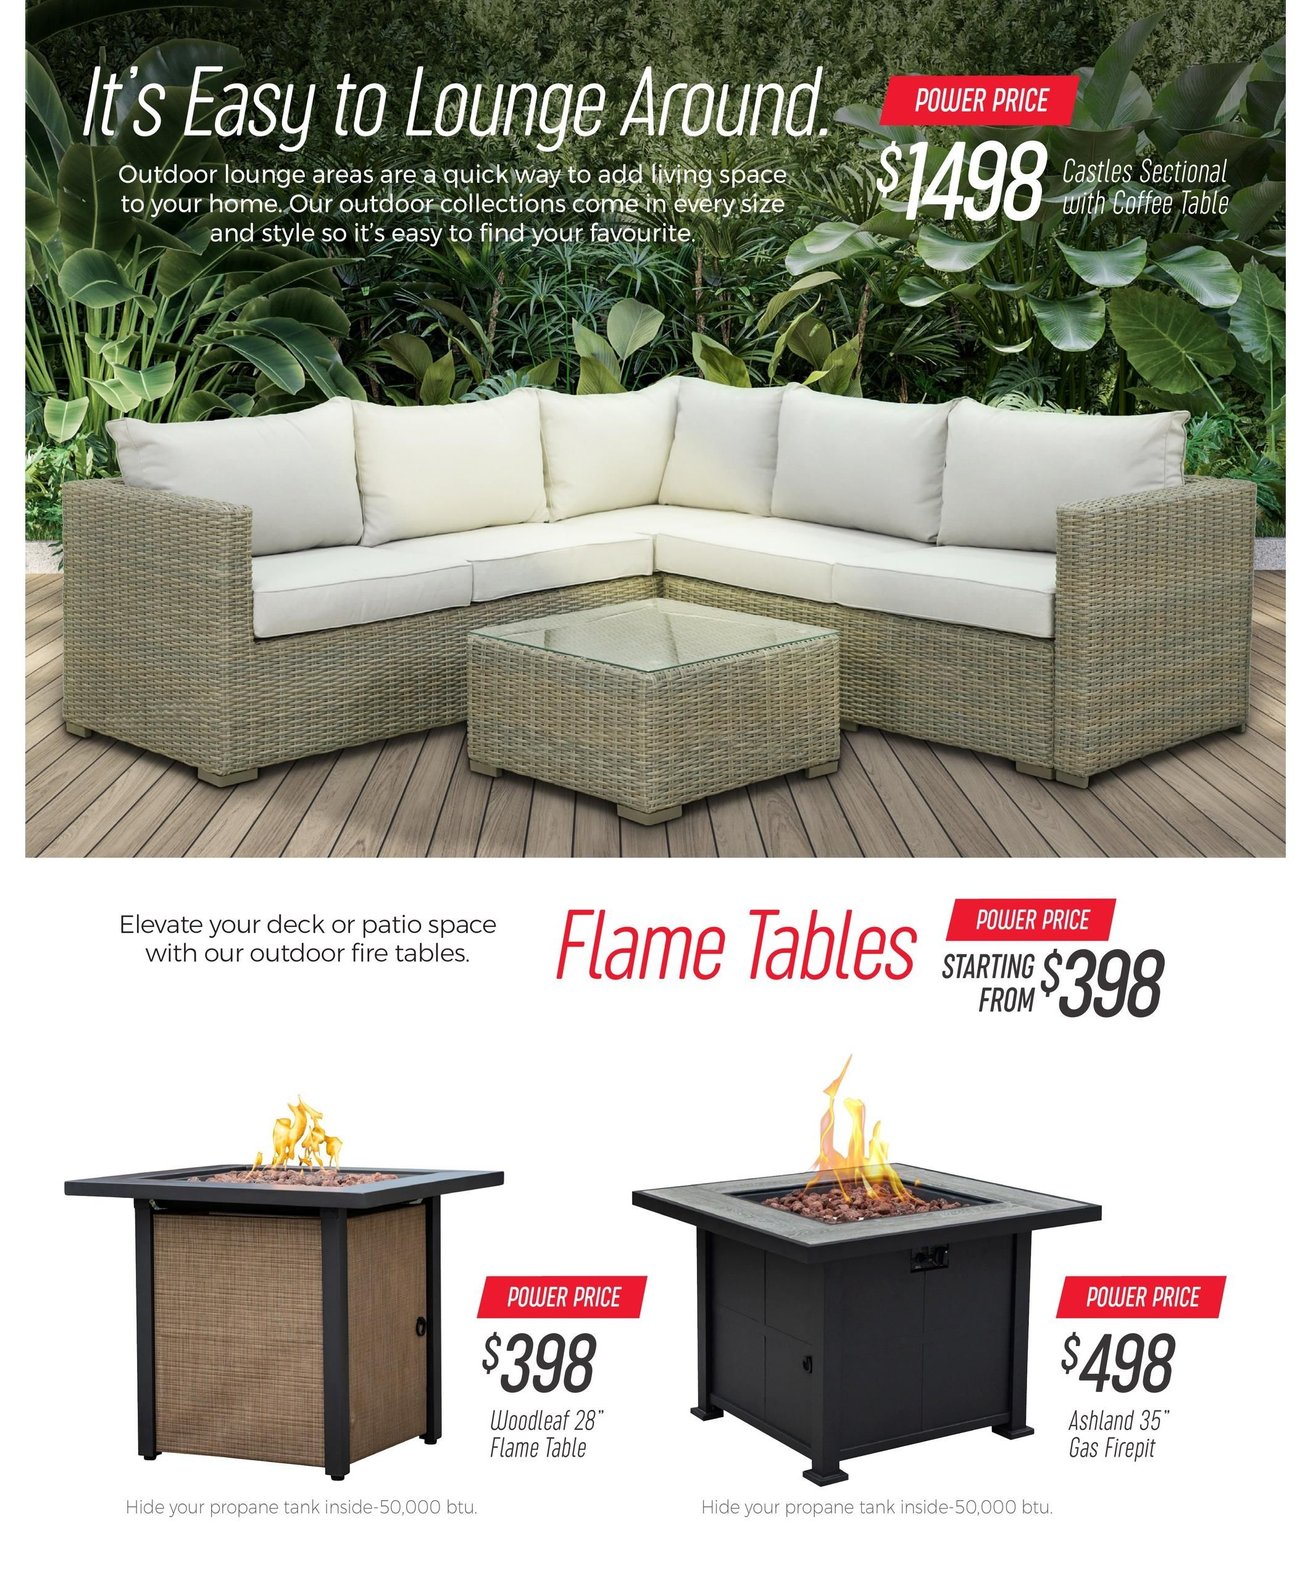 Tepperman's - Outdoor Living - Page 11